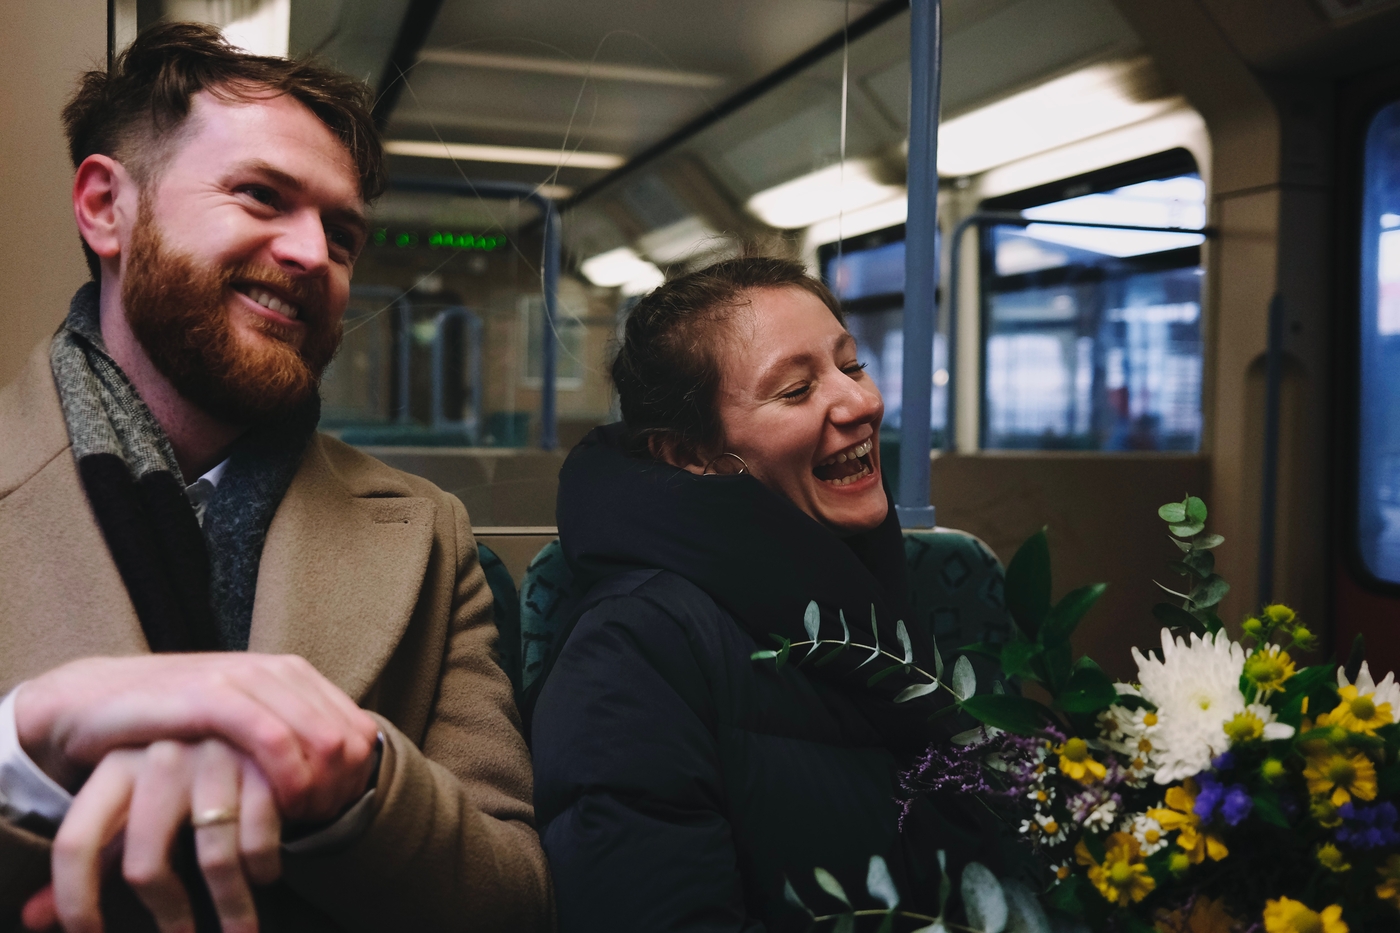 A bride and groom laughing while sitting on a train